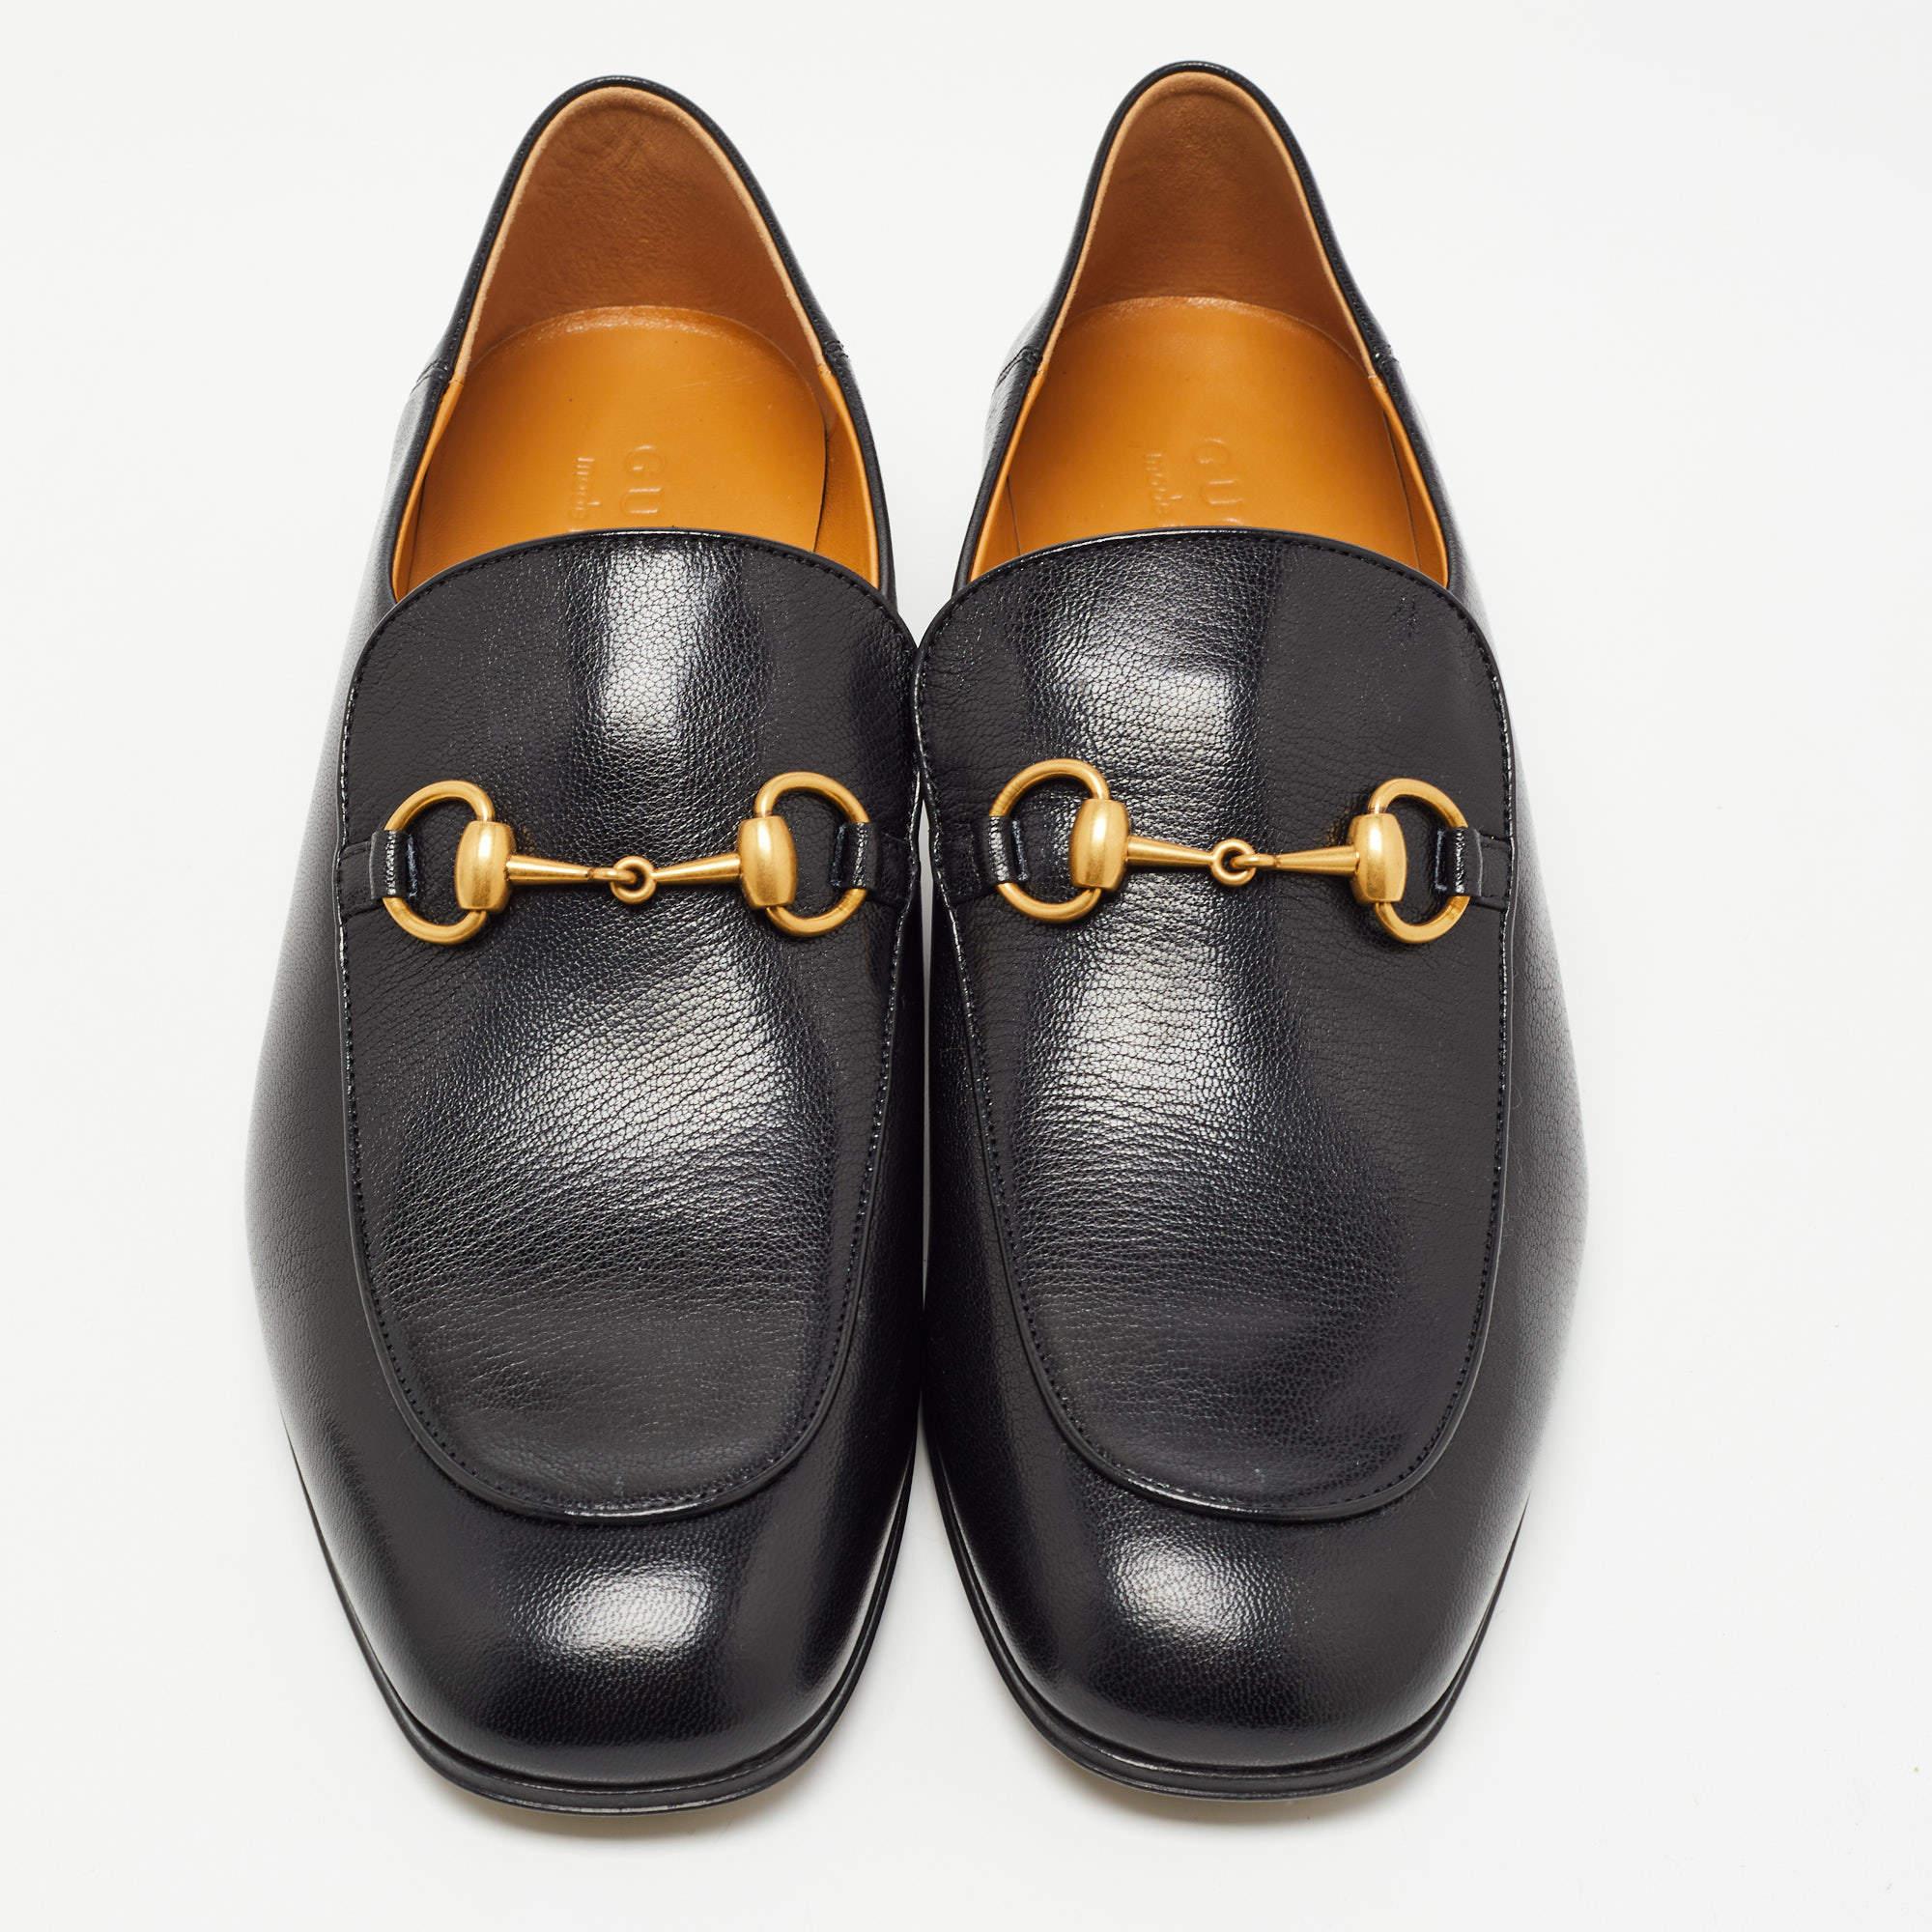 The Jordaan is a shoe that has a modern finish and a signature appeal. It has an elongated toe and the Gucci Horsebit motif gracing the uppers. This pair is crafted from leather and sewn with utmost care to envelop your feet with luxury.

Includes: